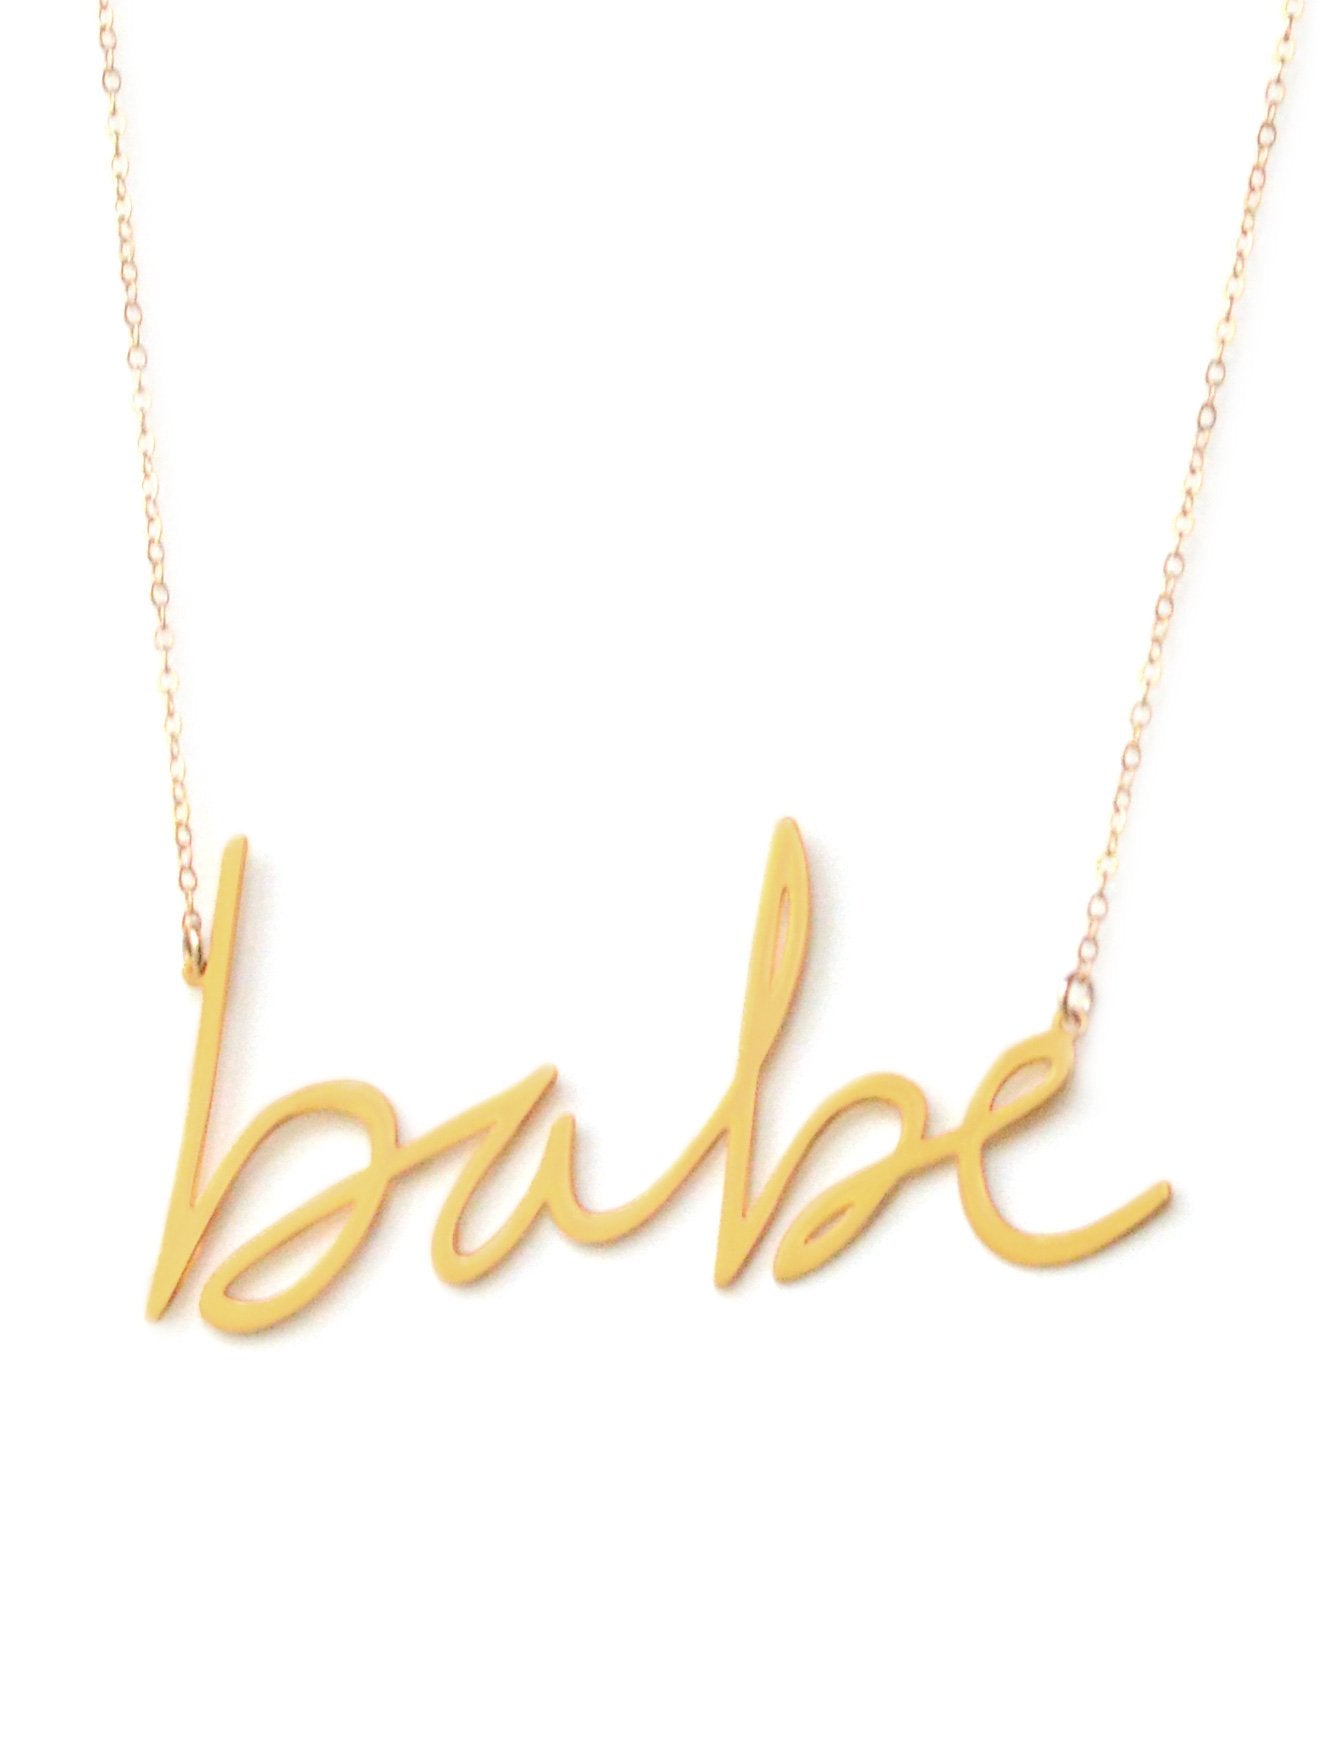 Babe Necklace - High Quality, Affordable, Hand Written, Self Love, Mantra Word Necklace - Available in Gold and Silver - Small and Large Sizes - Made in USA - Brevity Jewelry